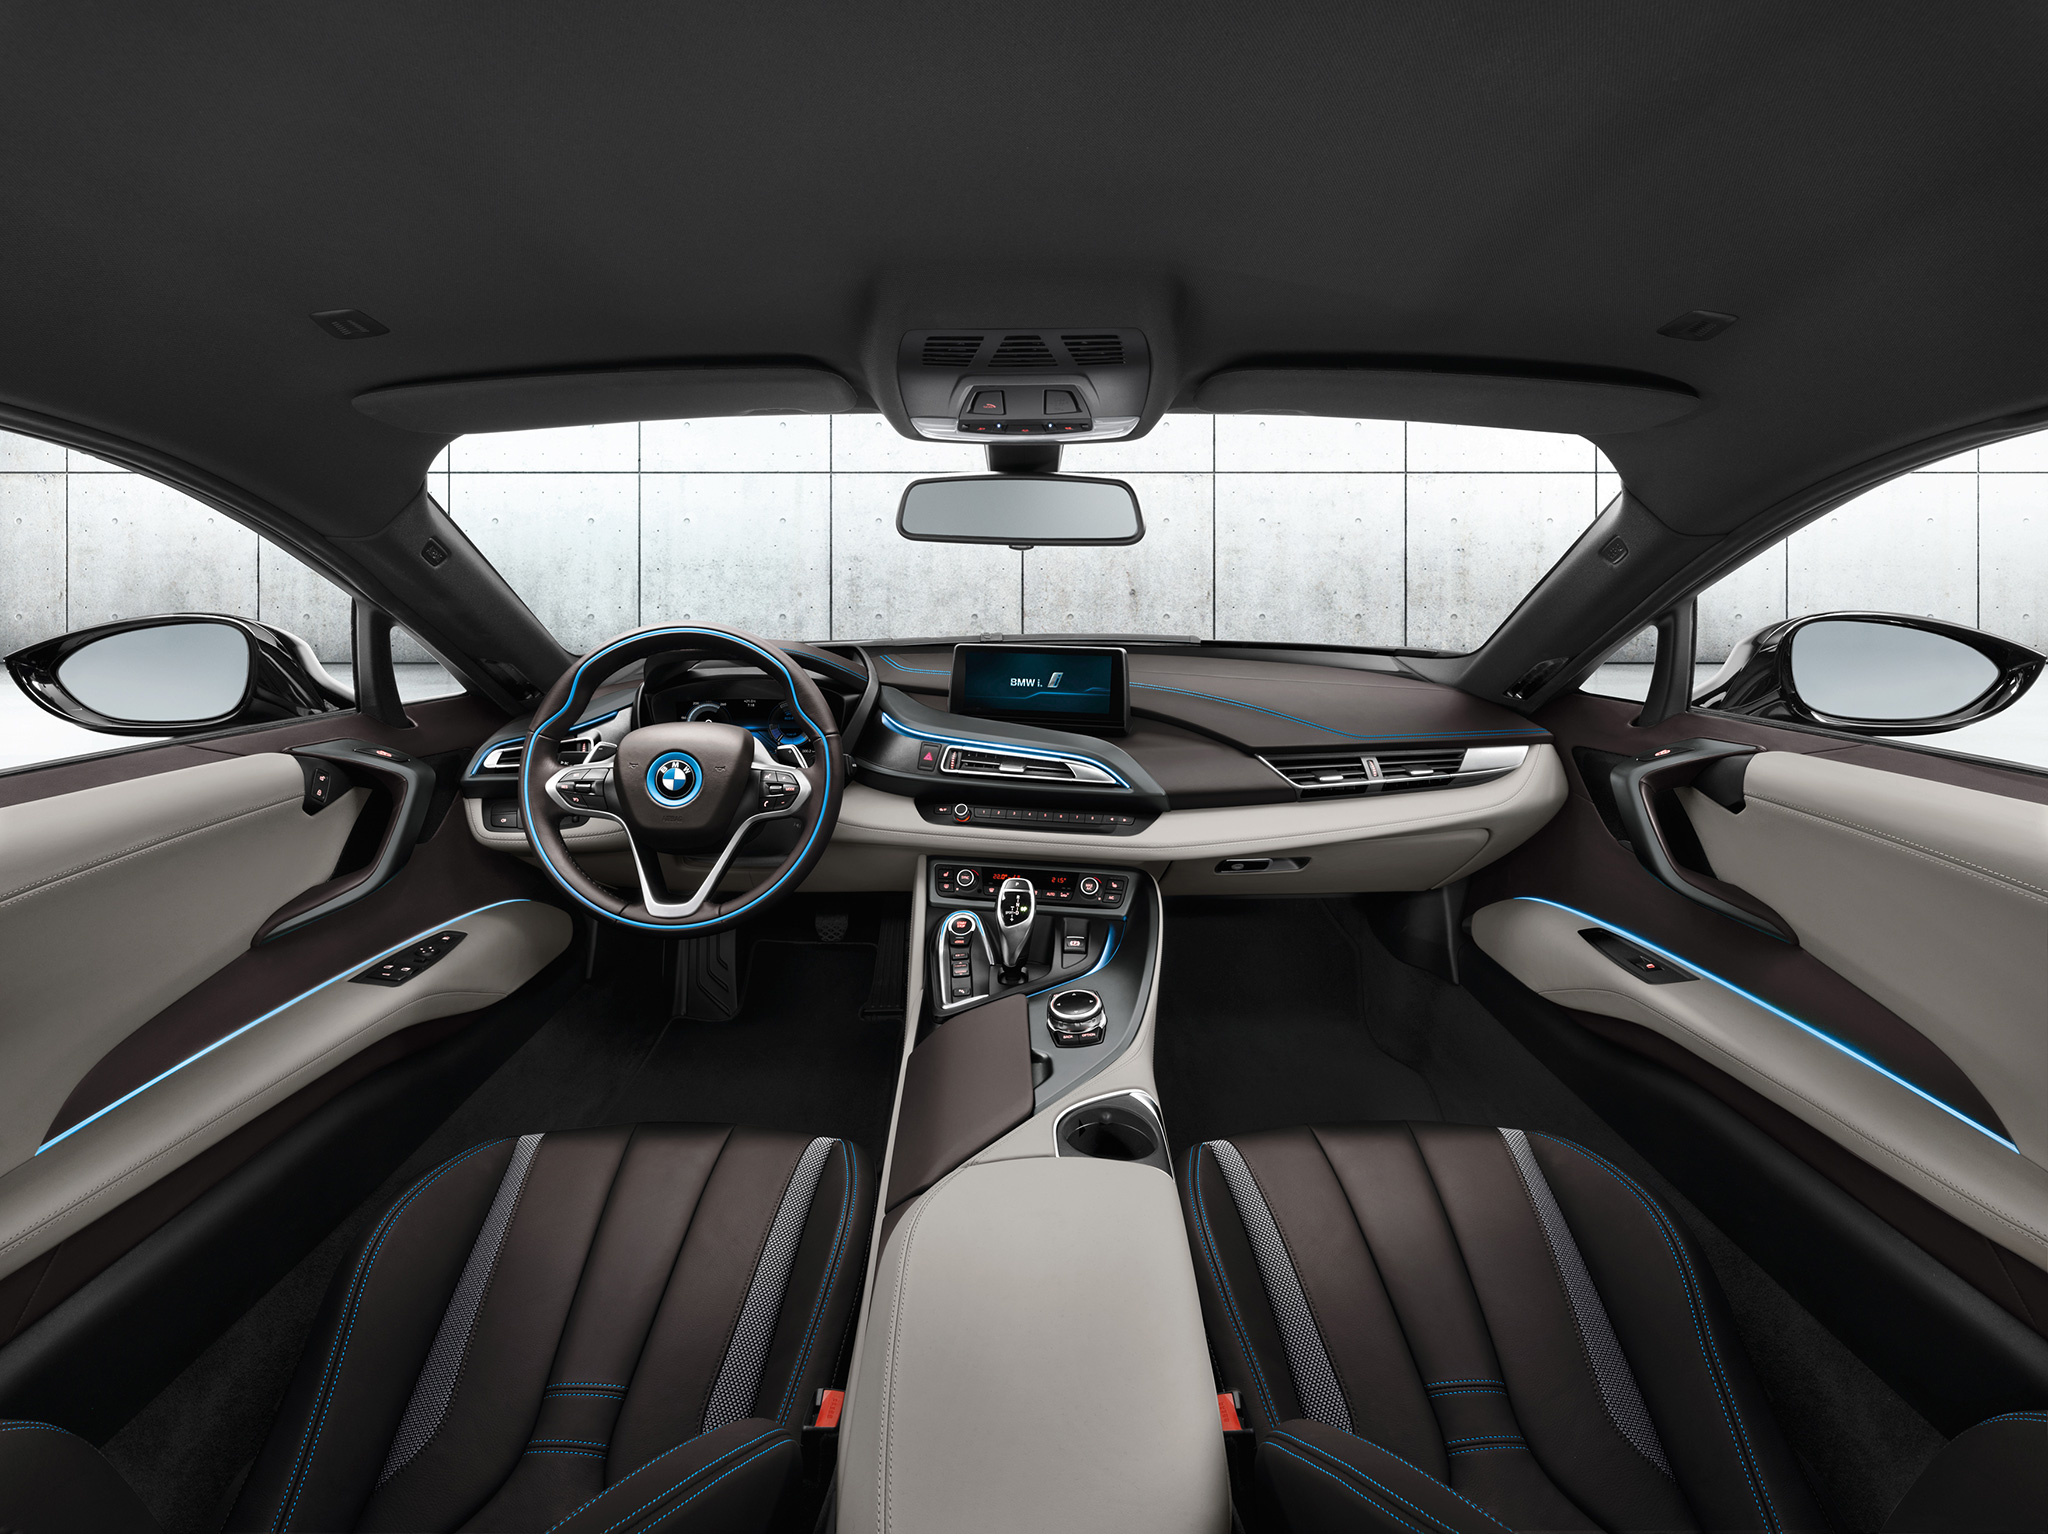 The tailor-made Louis Vuitton luggage set for the BMW i8 made from